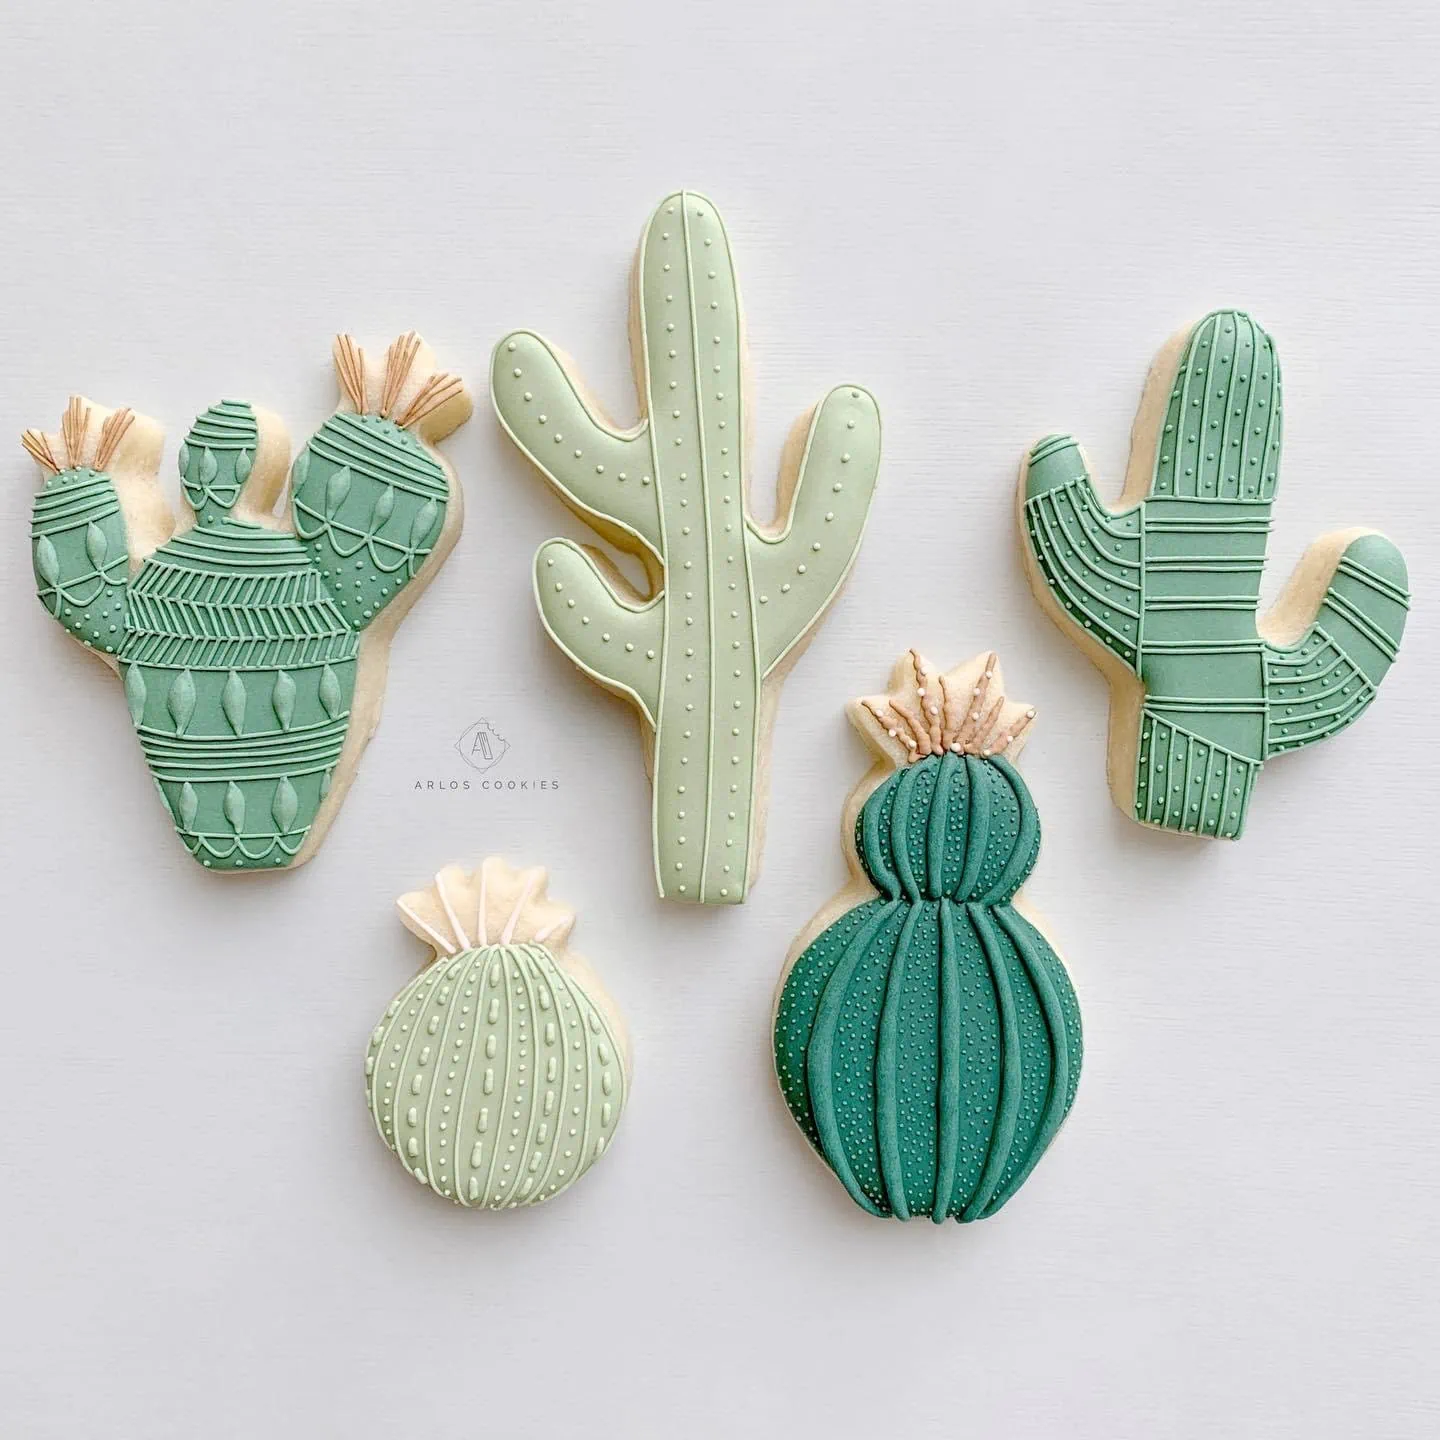 Five cactus-shaped cookies in various shades of green.